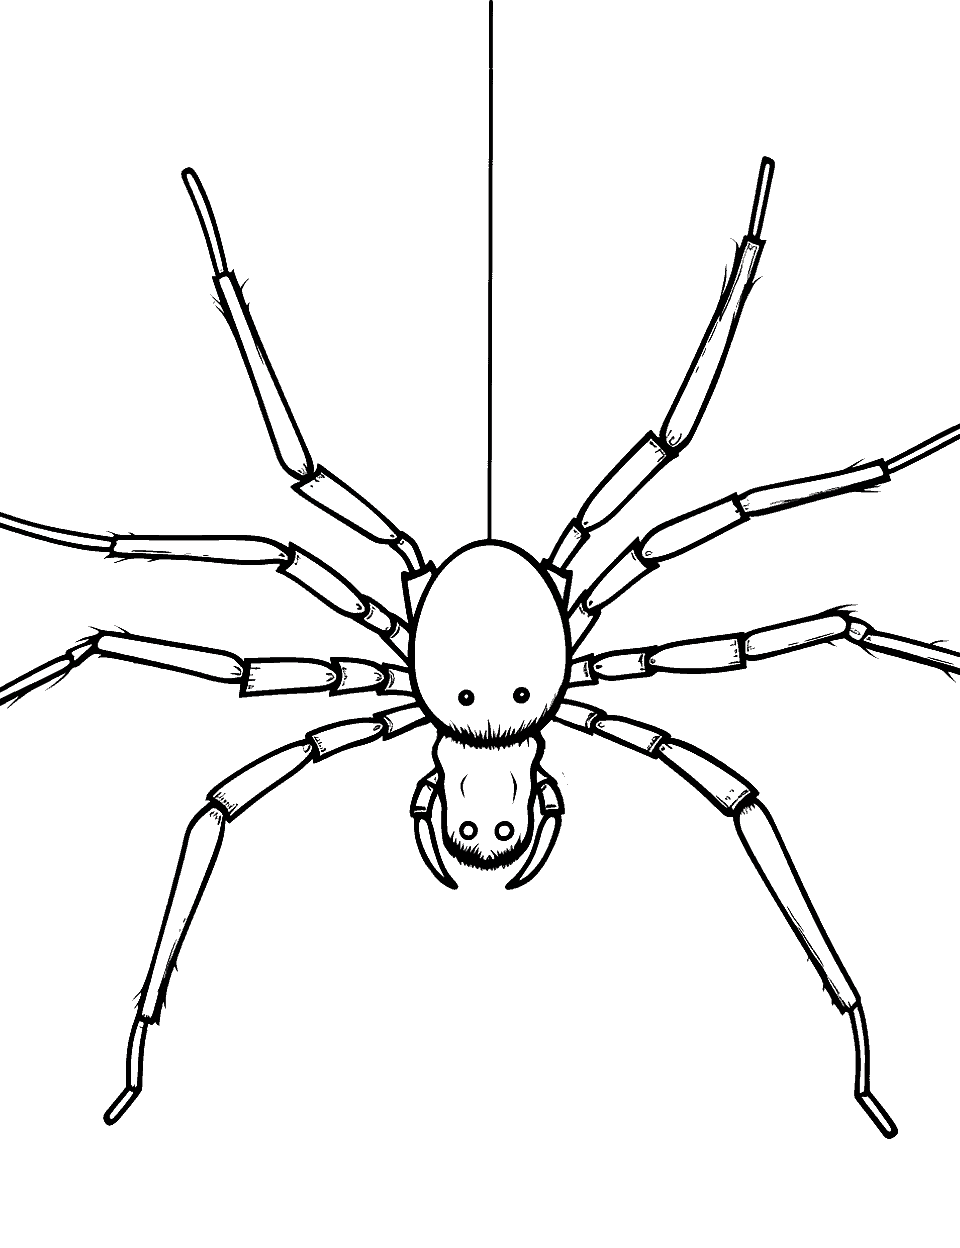 Spider Hanging Coloring Page - A spider hanging with its thread looking for a place to make a home.